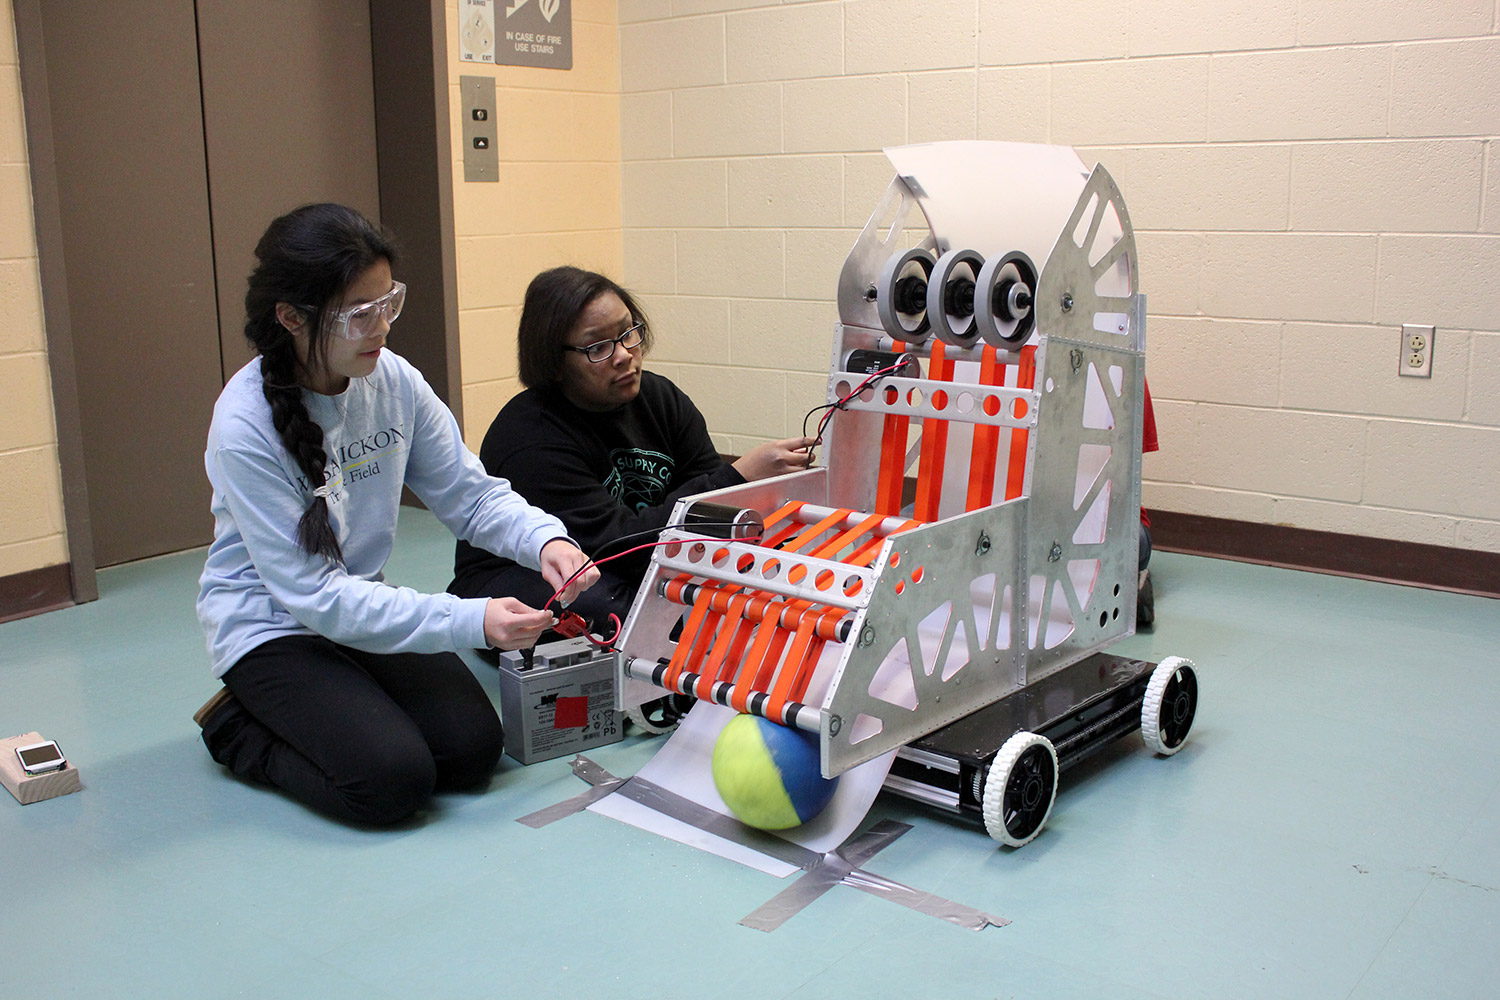 Students work to test the ball path on an almost complete machine.